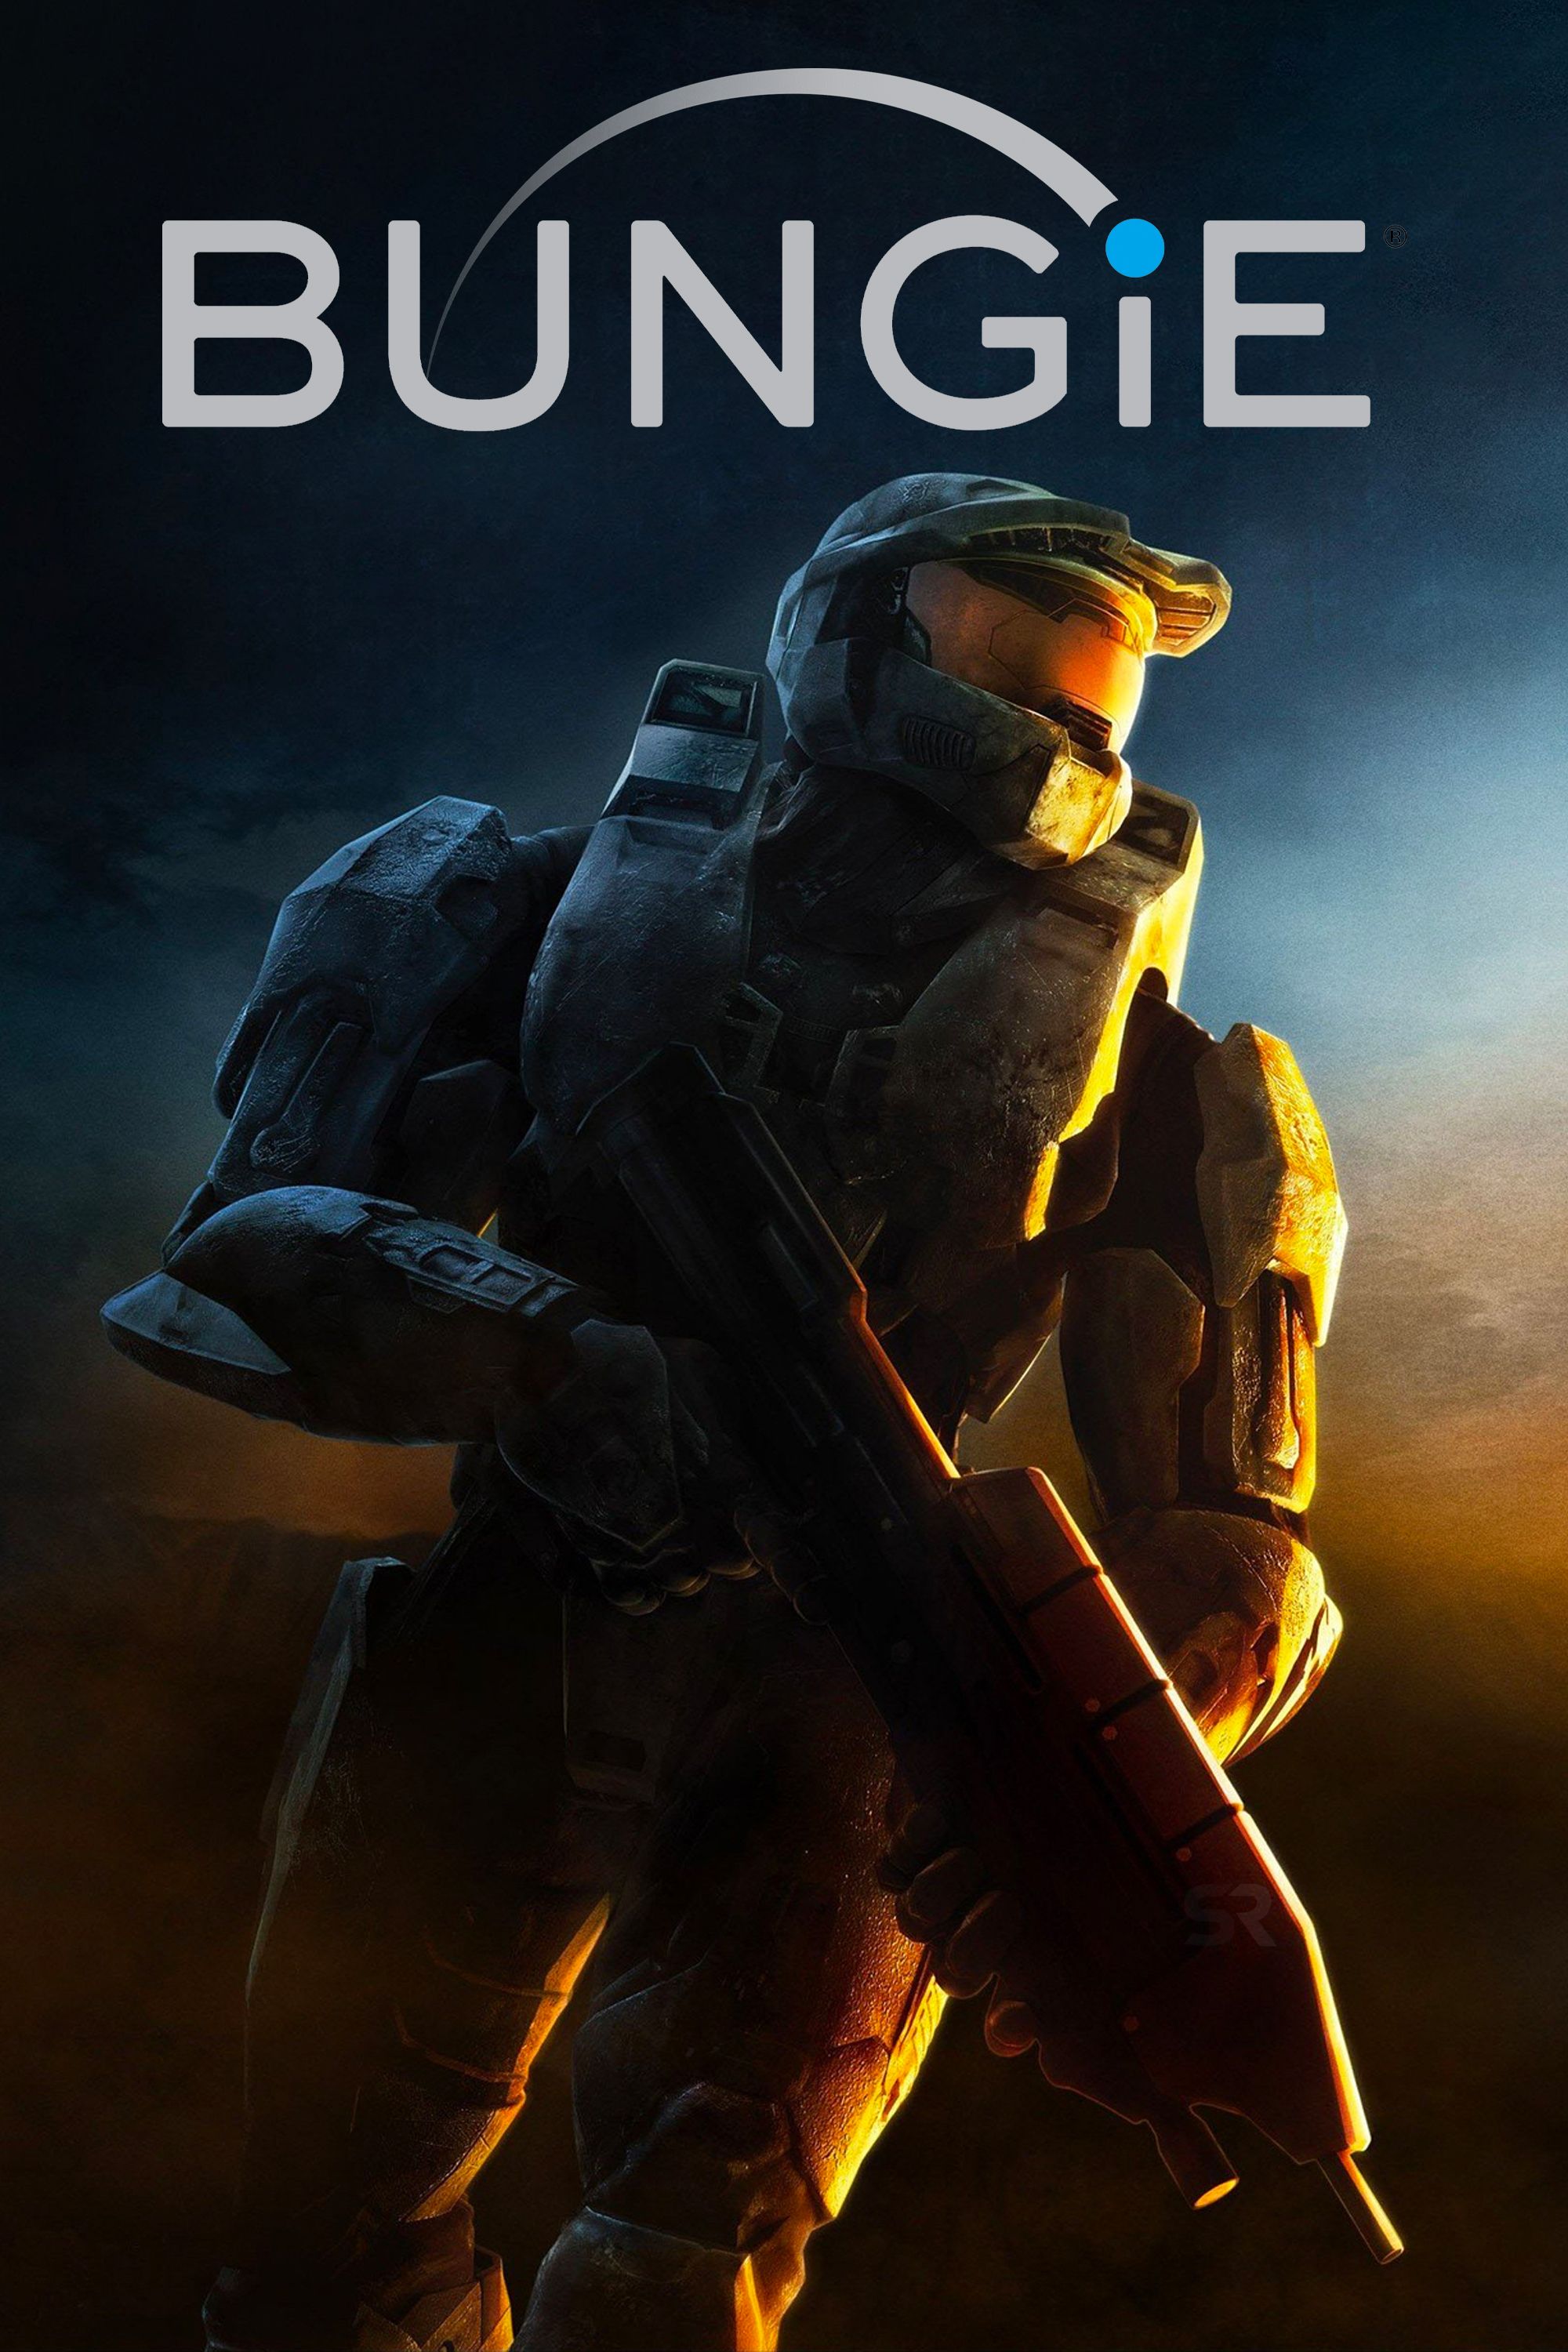 Bungie Halo 3 Poster